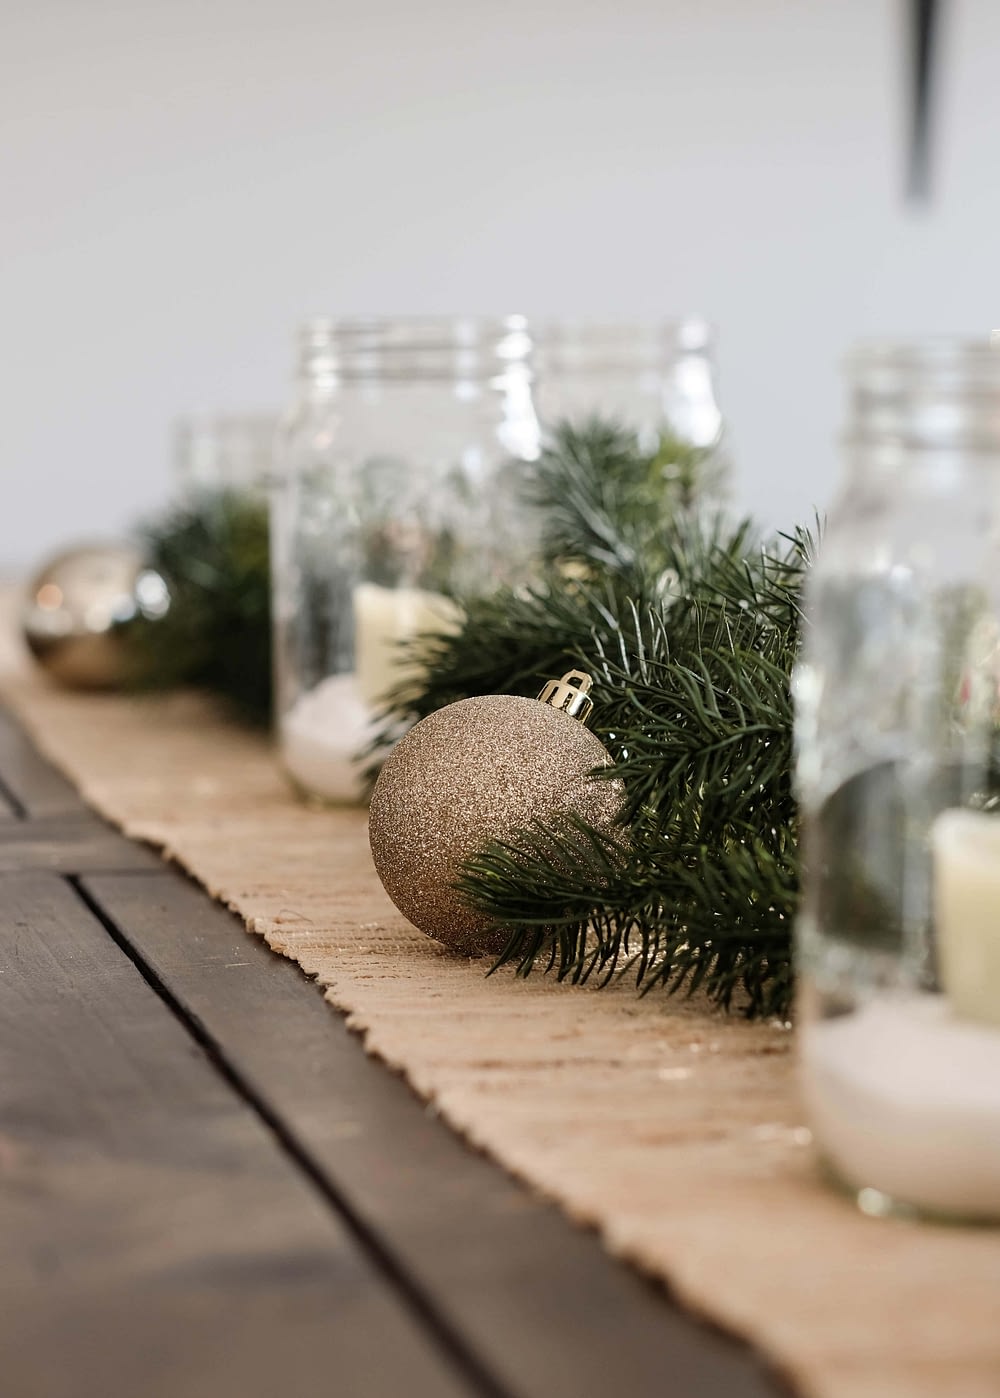 Christmas table centerpiece using ornaments and mason jars